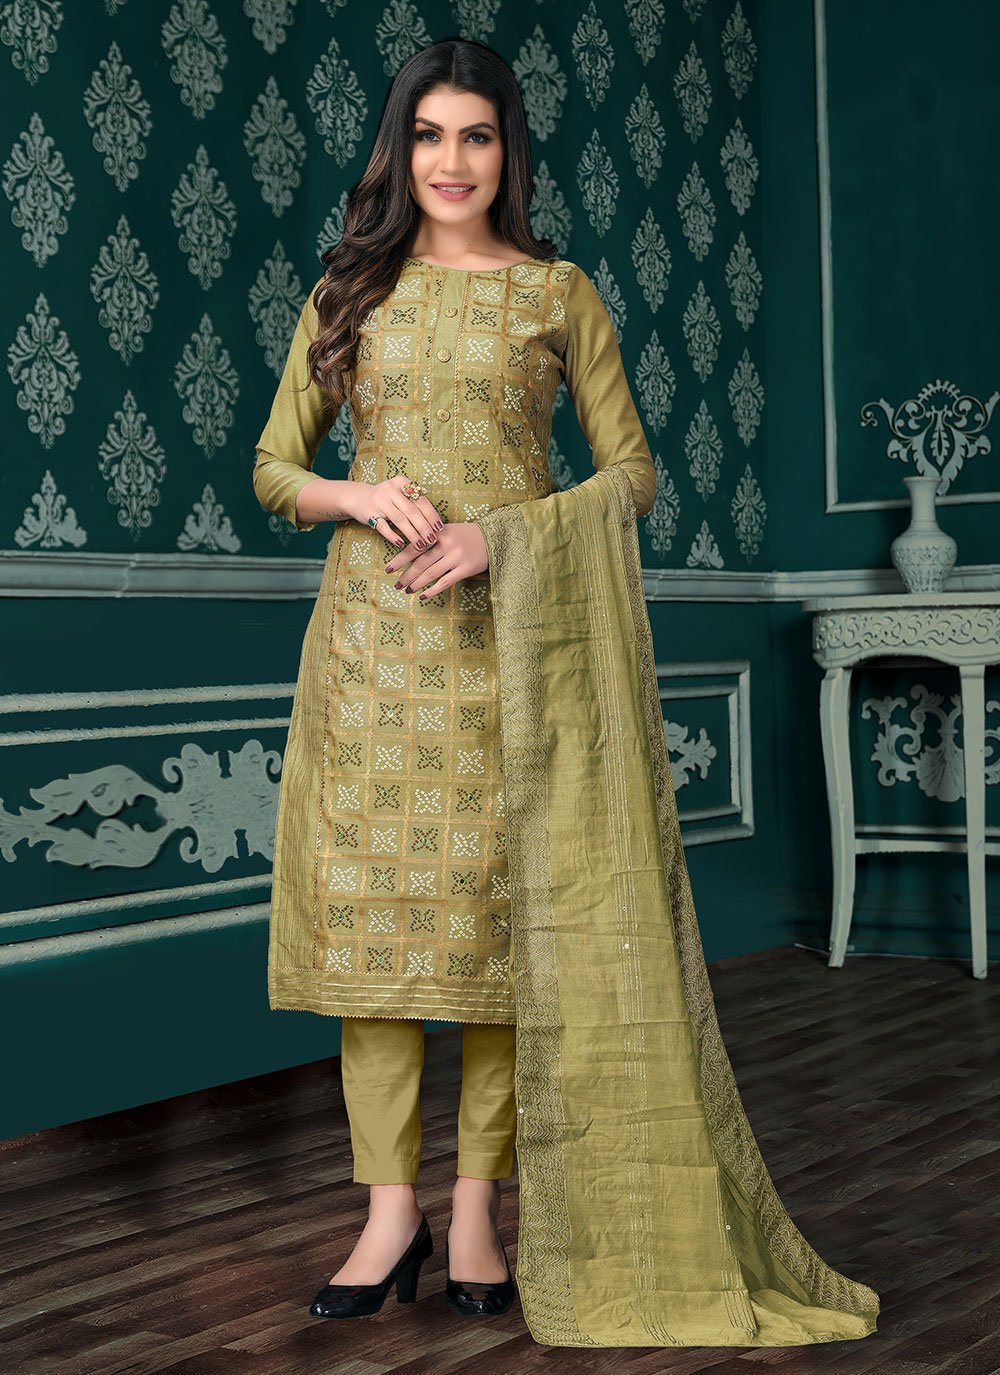 https://cdn.salwari.com/image/cache/product-2022/embroidered-chanderi-cotton-pant-style-suit-in-green-59527-1000x1375.jpg